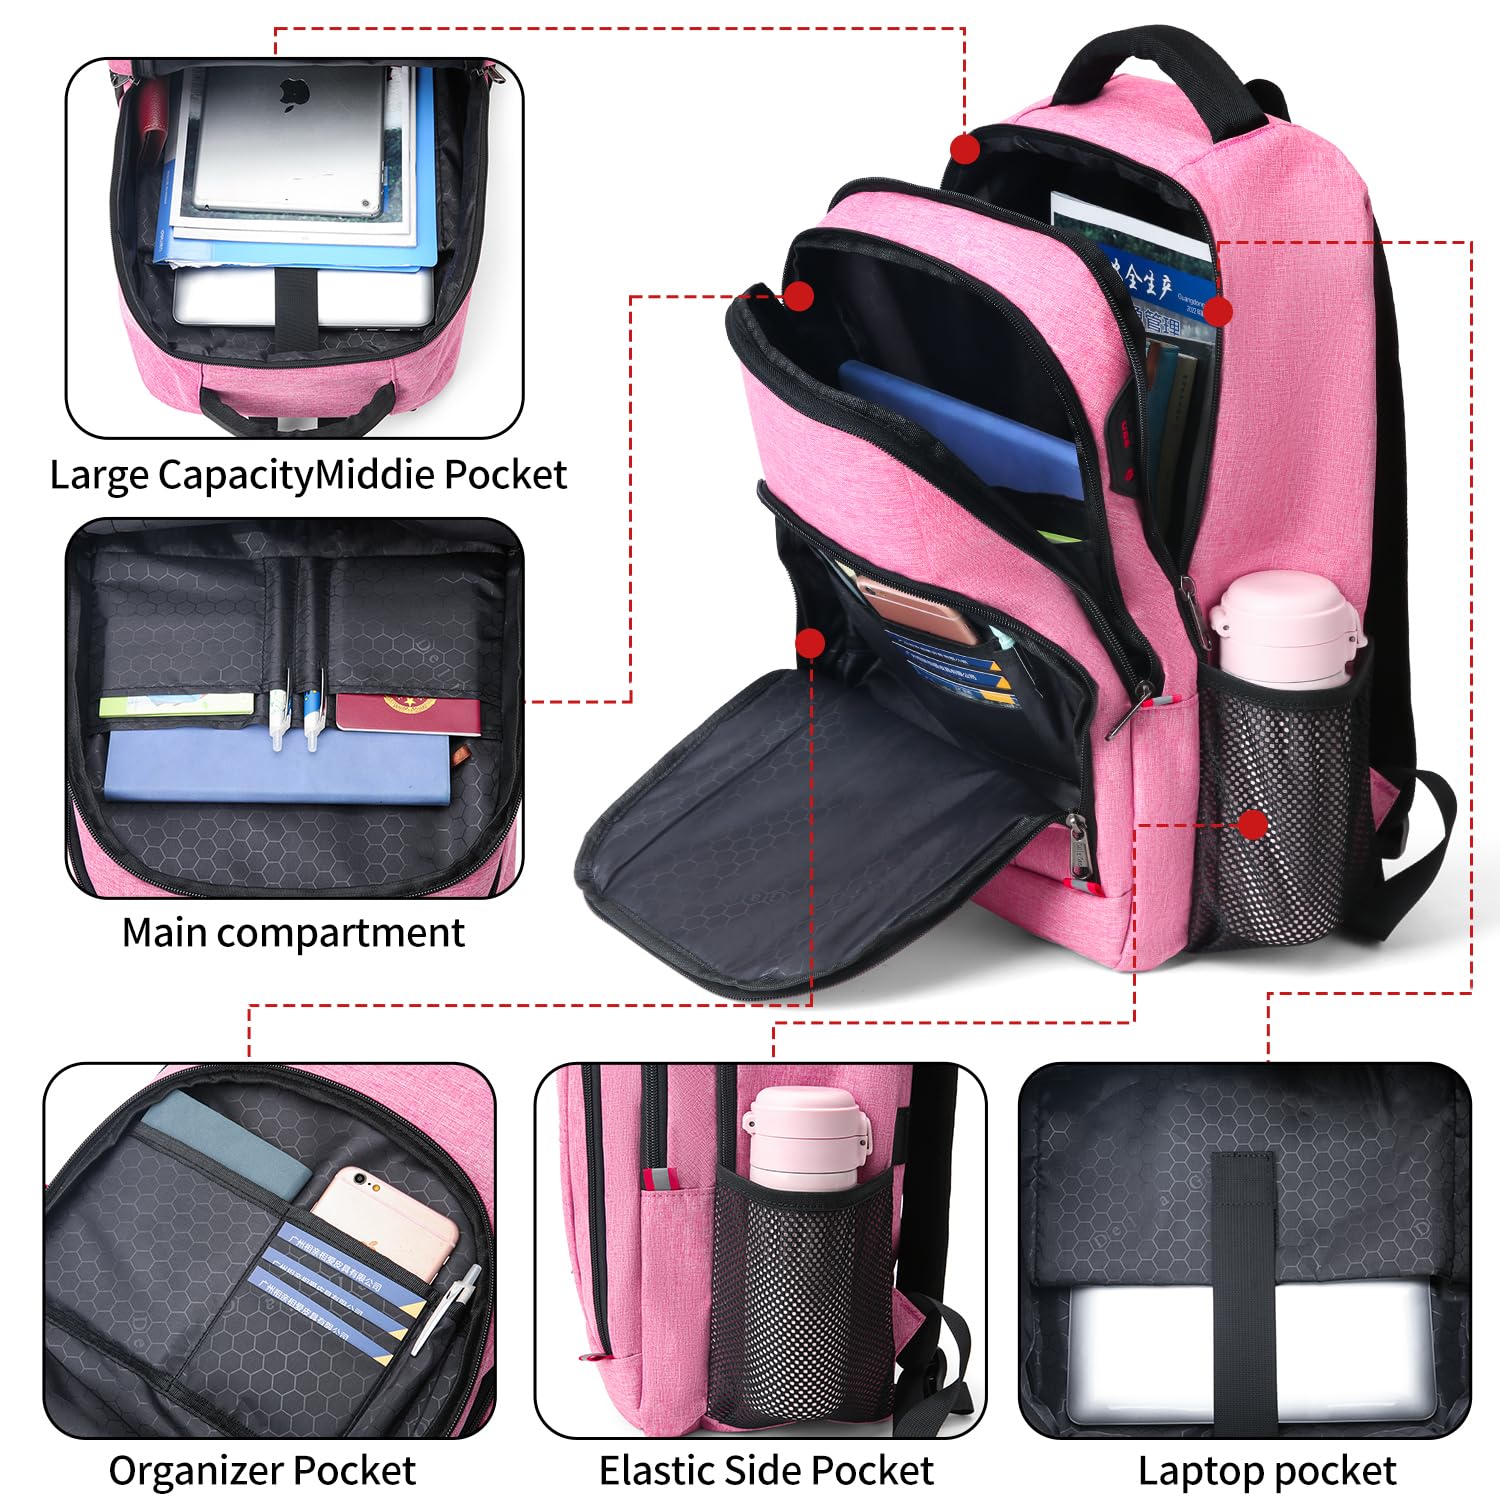 Della Gao Travel Laptop Backpack, Water Resistant Work Backpack with Laptop Compartment, Airline Approved Business Backpack Fit 15.6 Inch Laptops for Women, Pink